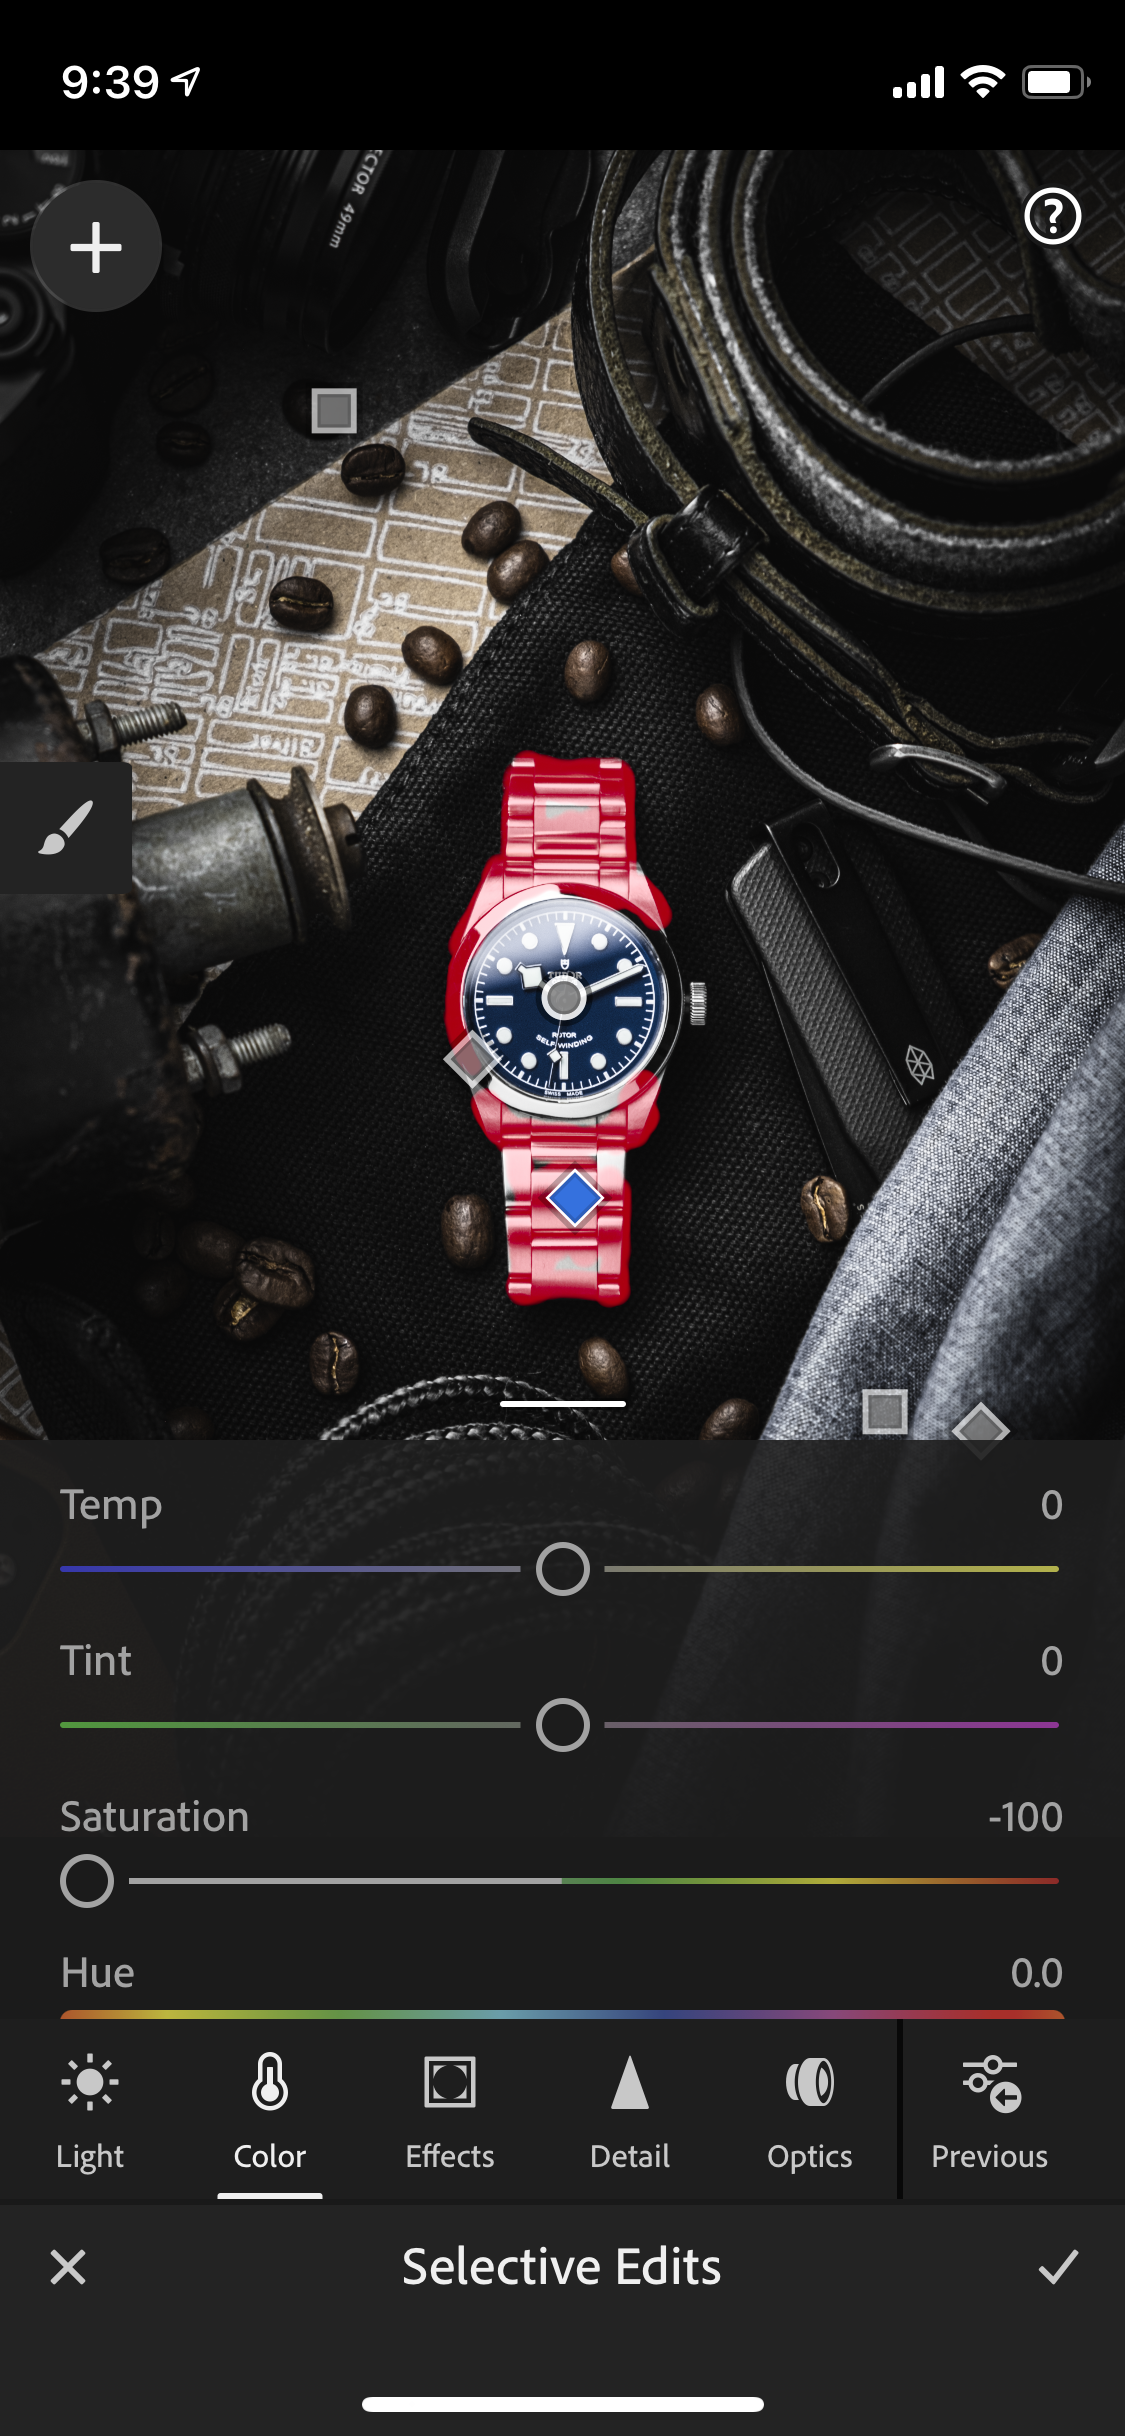 How to use the power of contrast in watch photography